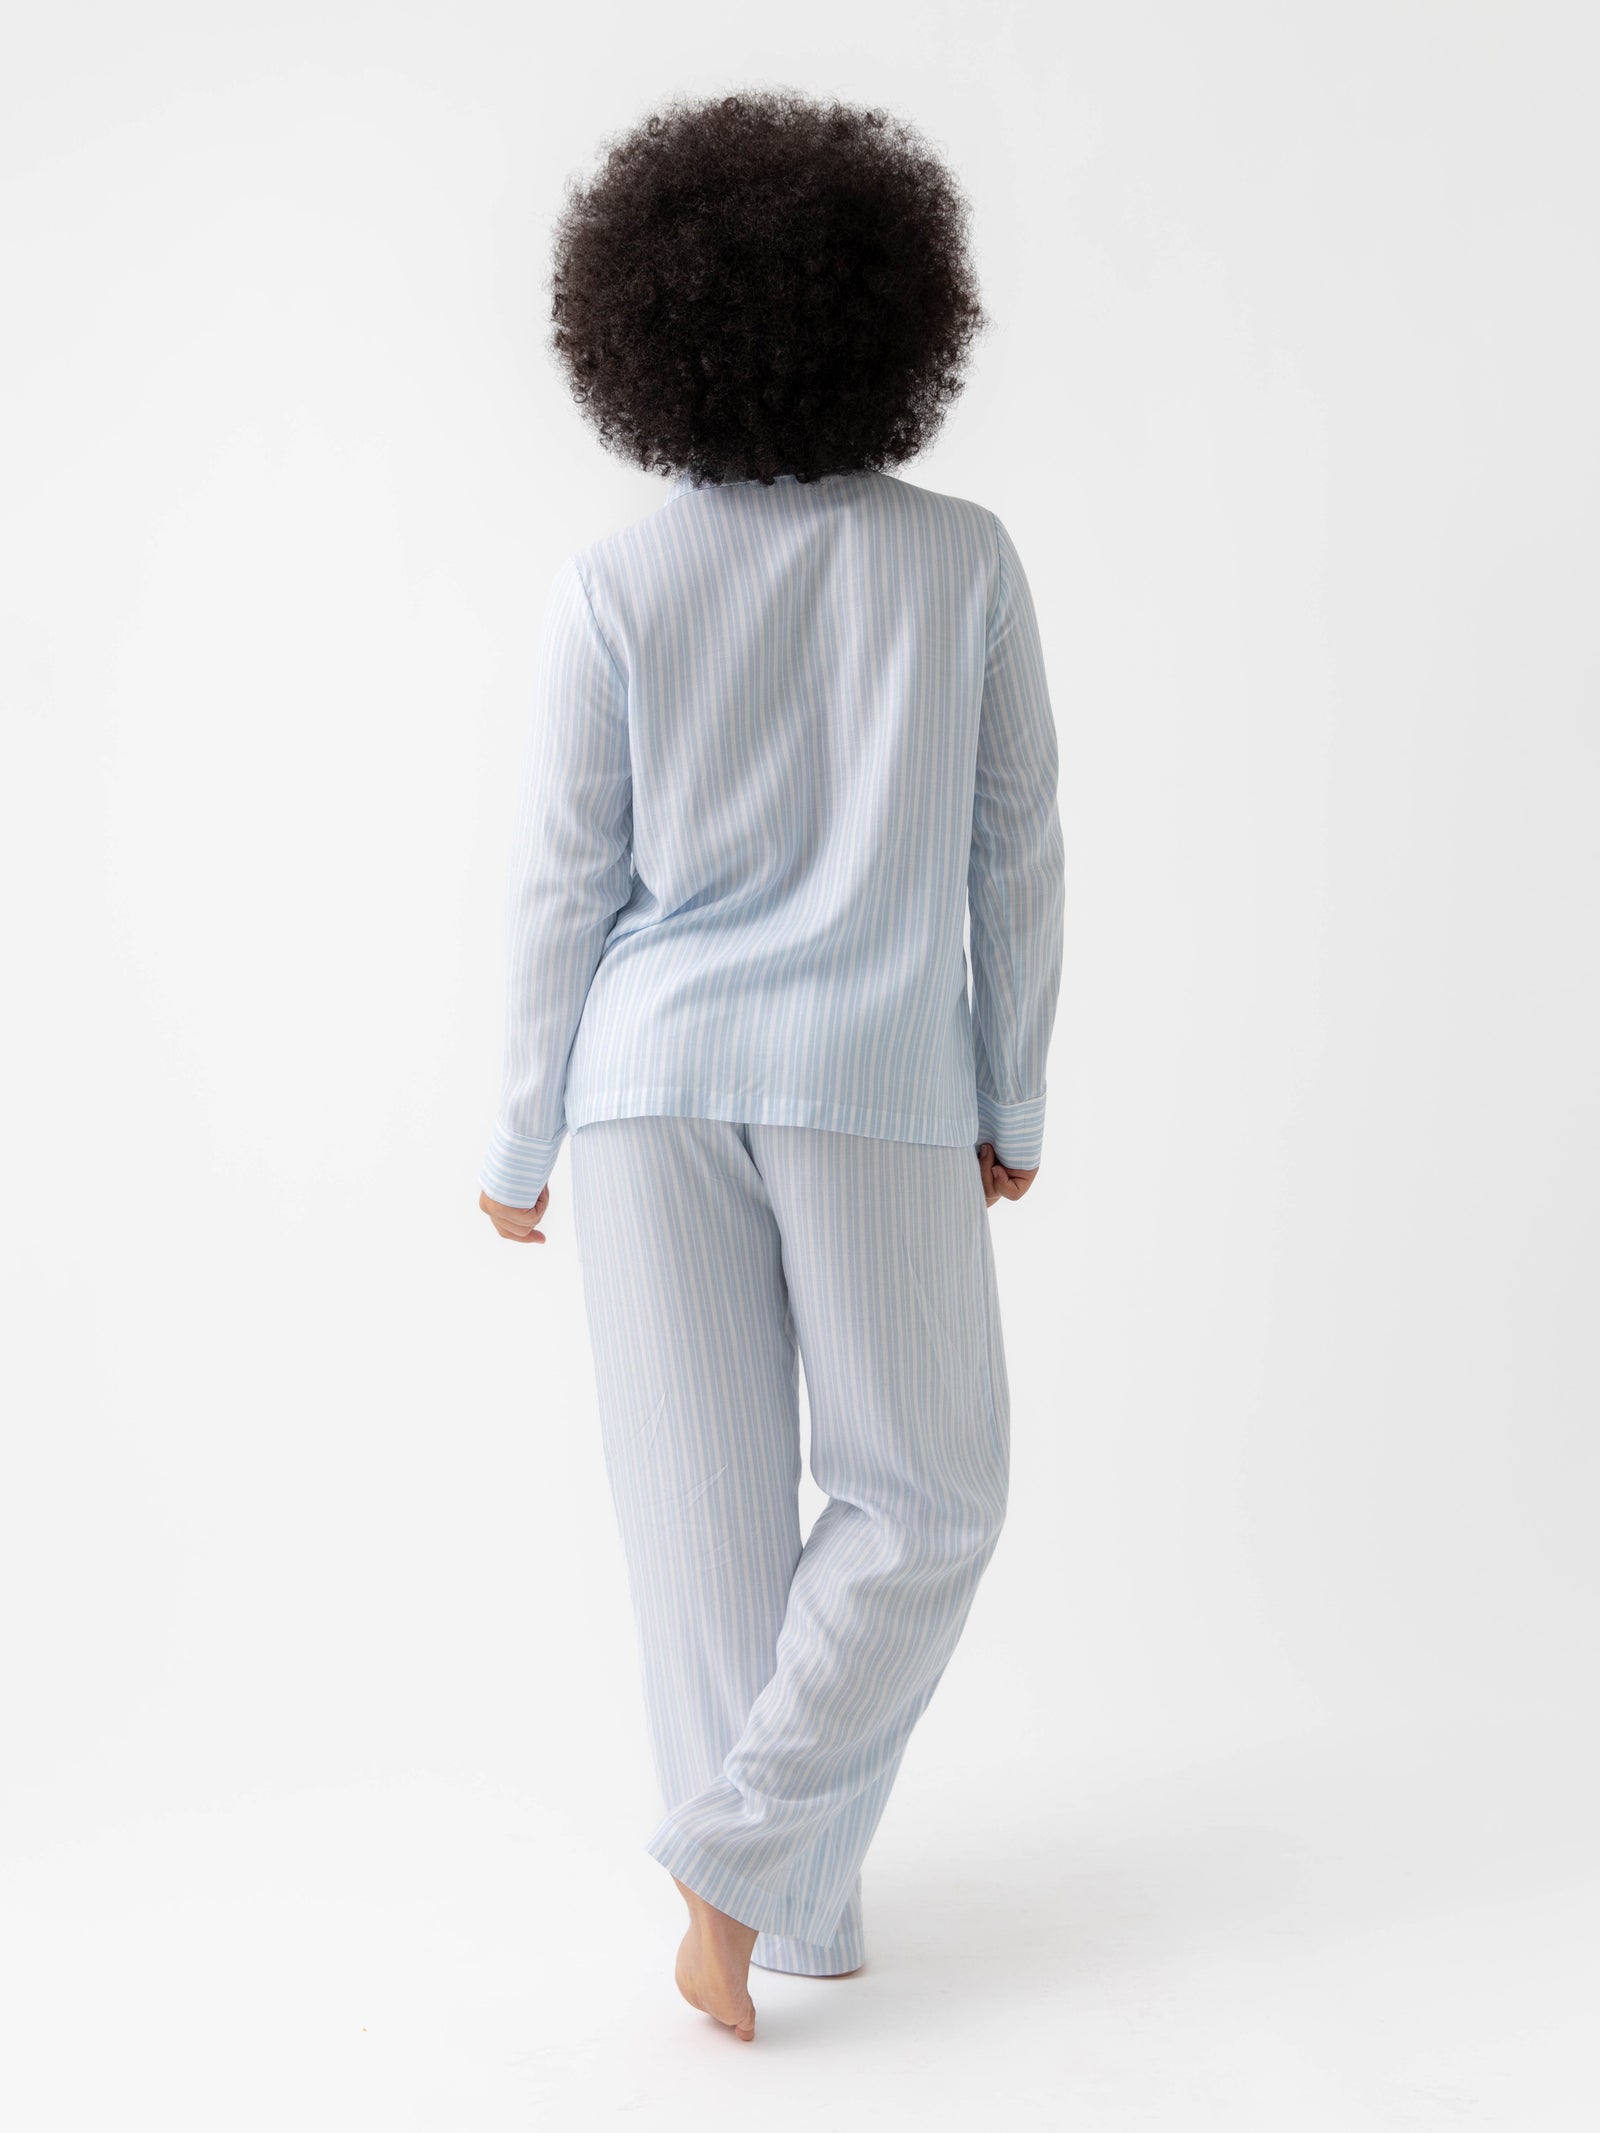 Back of woman wearing spring blue stripe pajama set with white background 